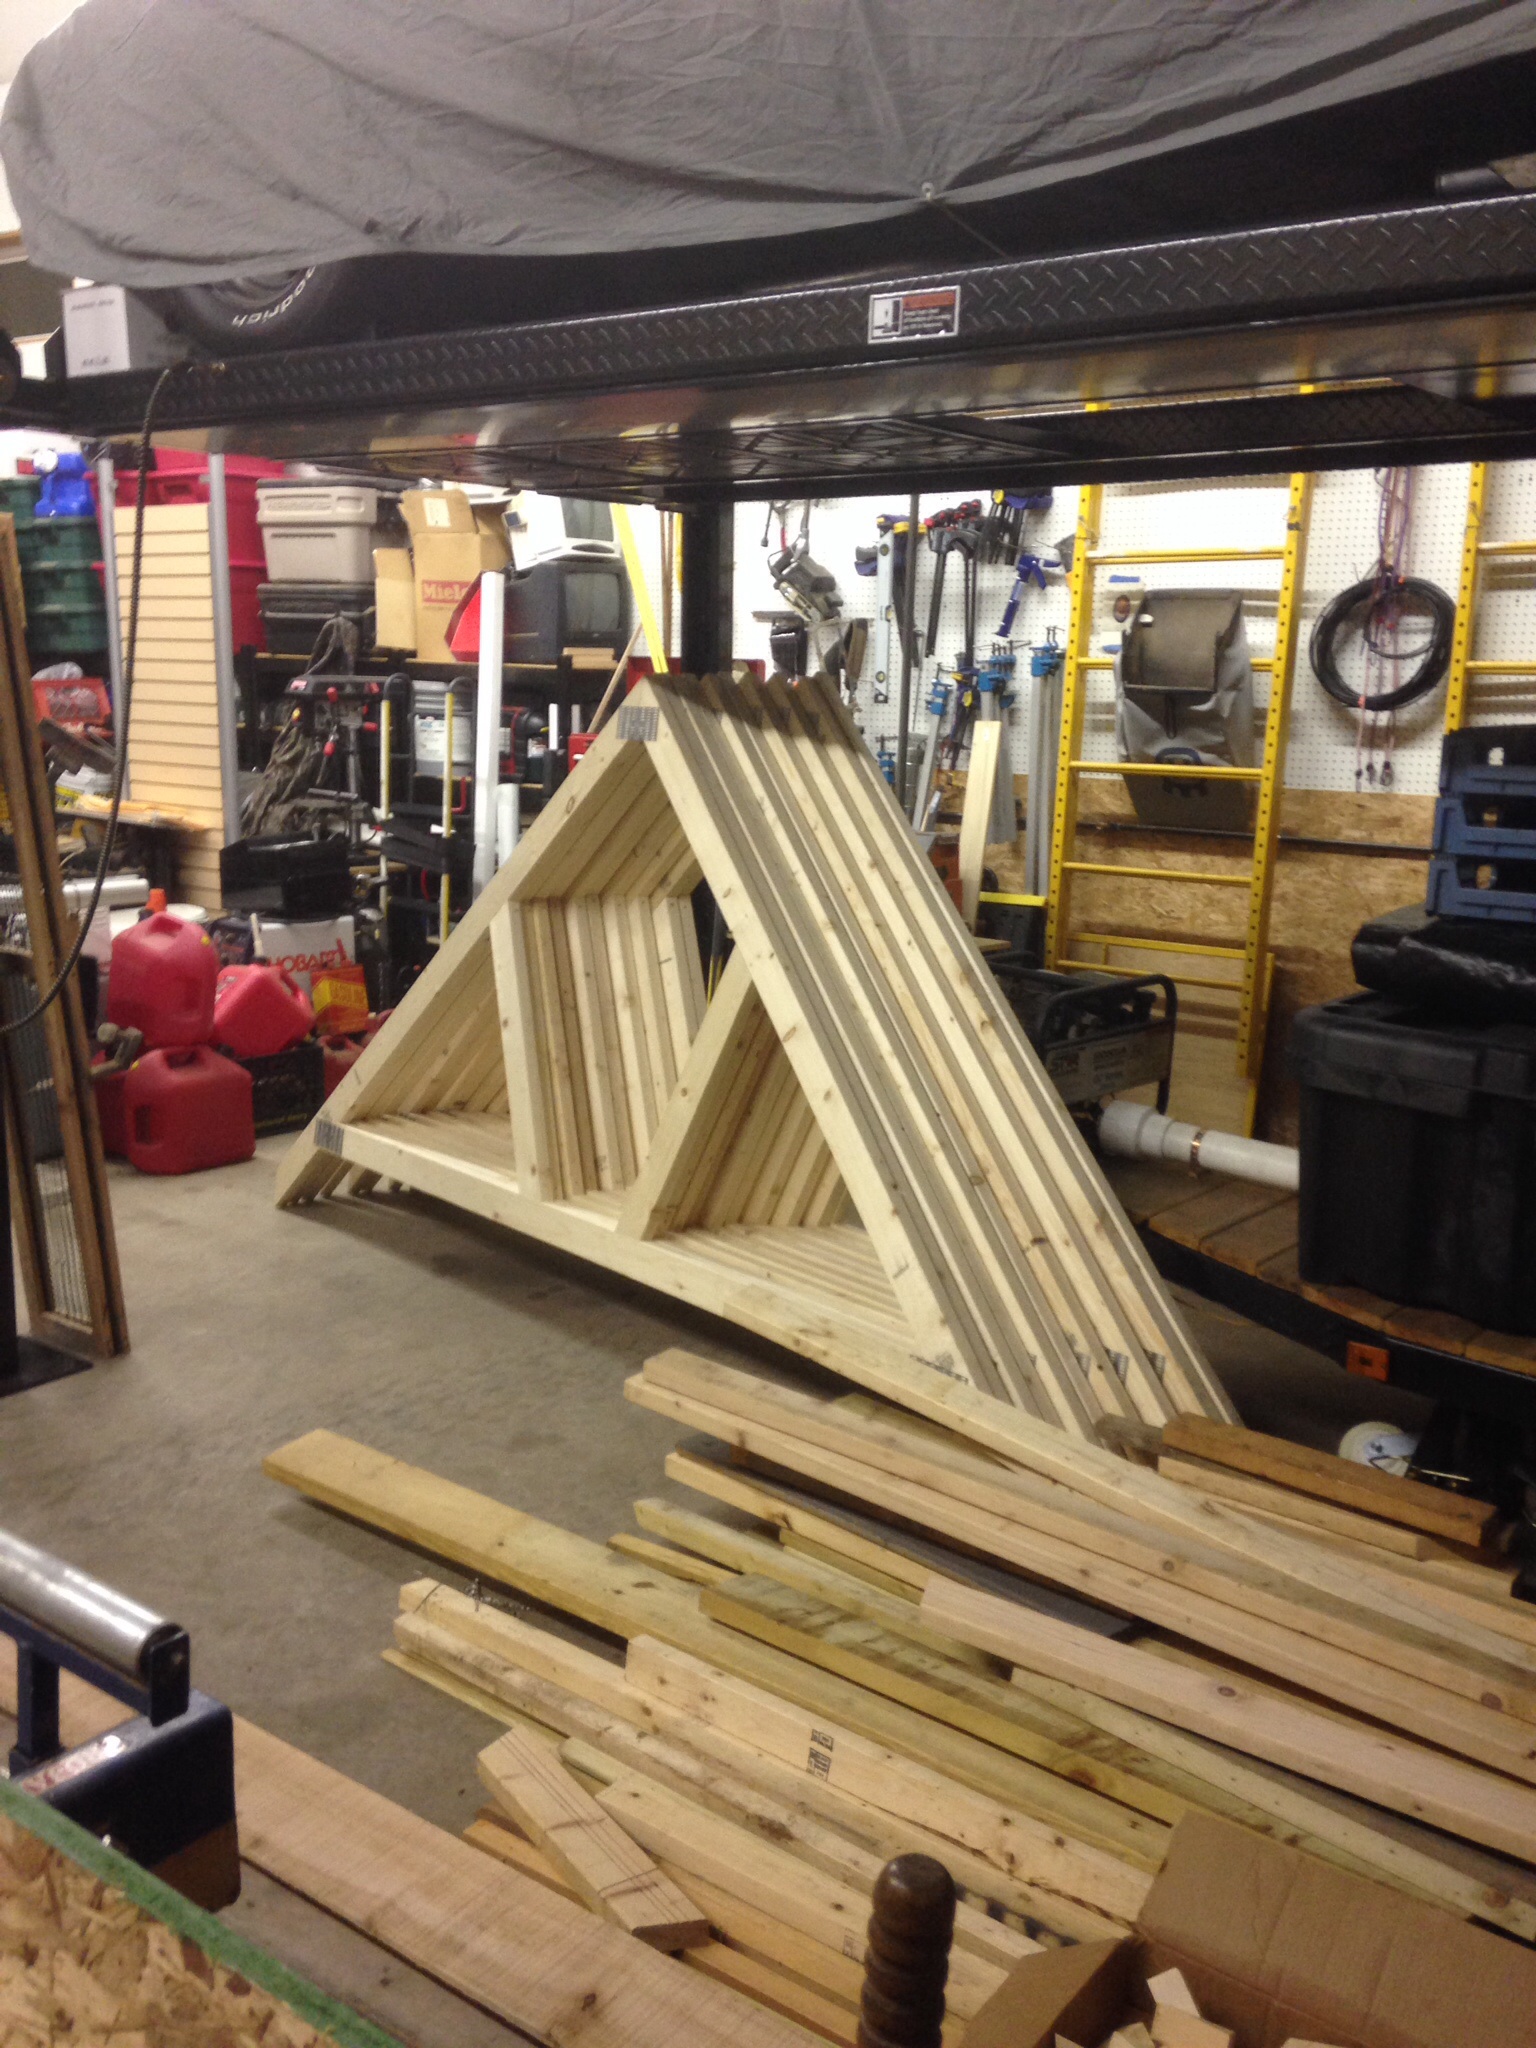 All 10 trusses built, just have to finish the gable vents.